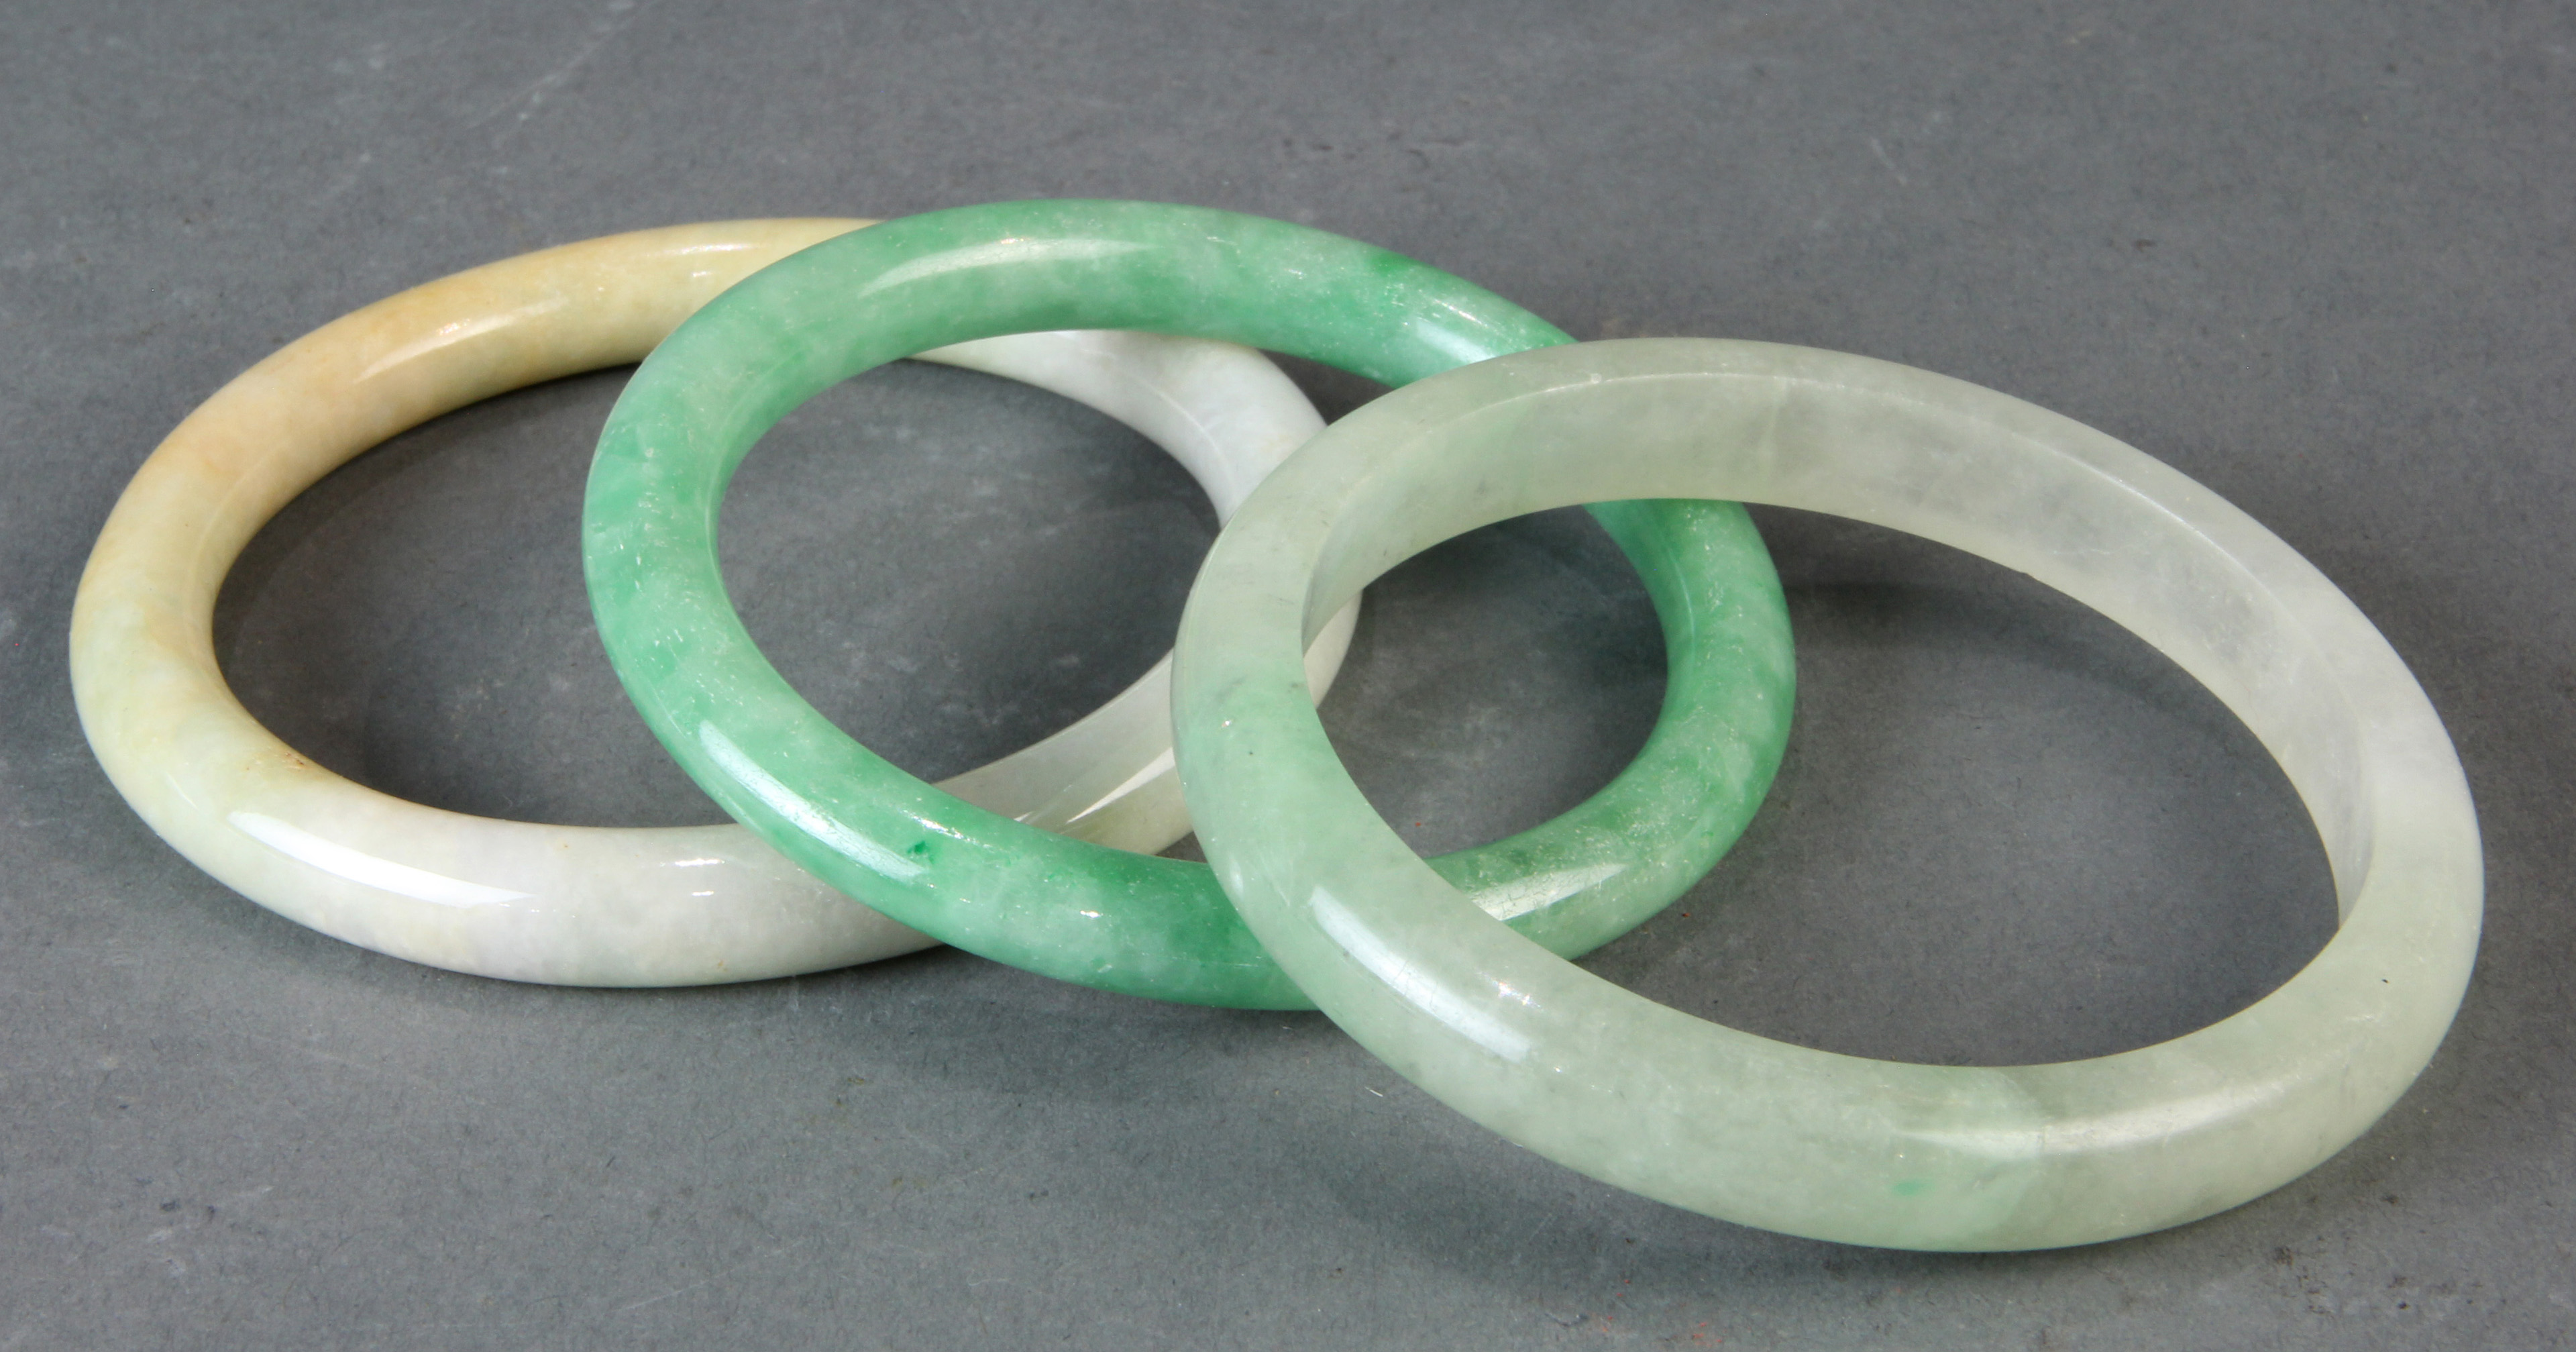  LOT OF 3 CHINESE JADEITE BANGLES 3a6c56